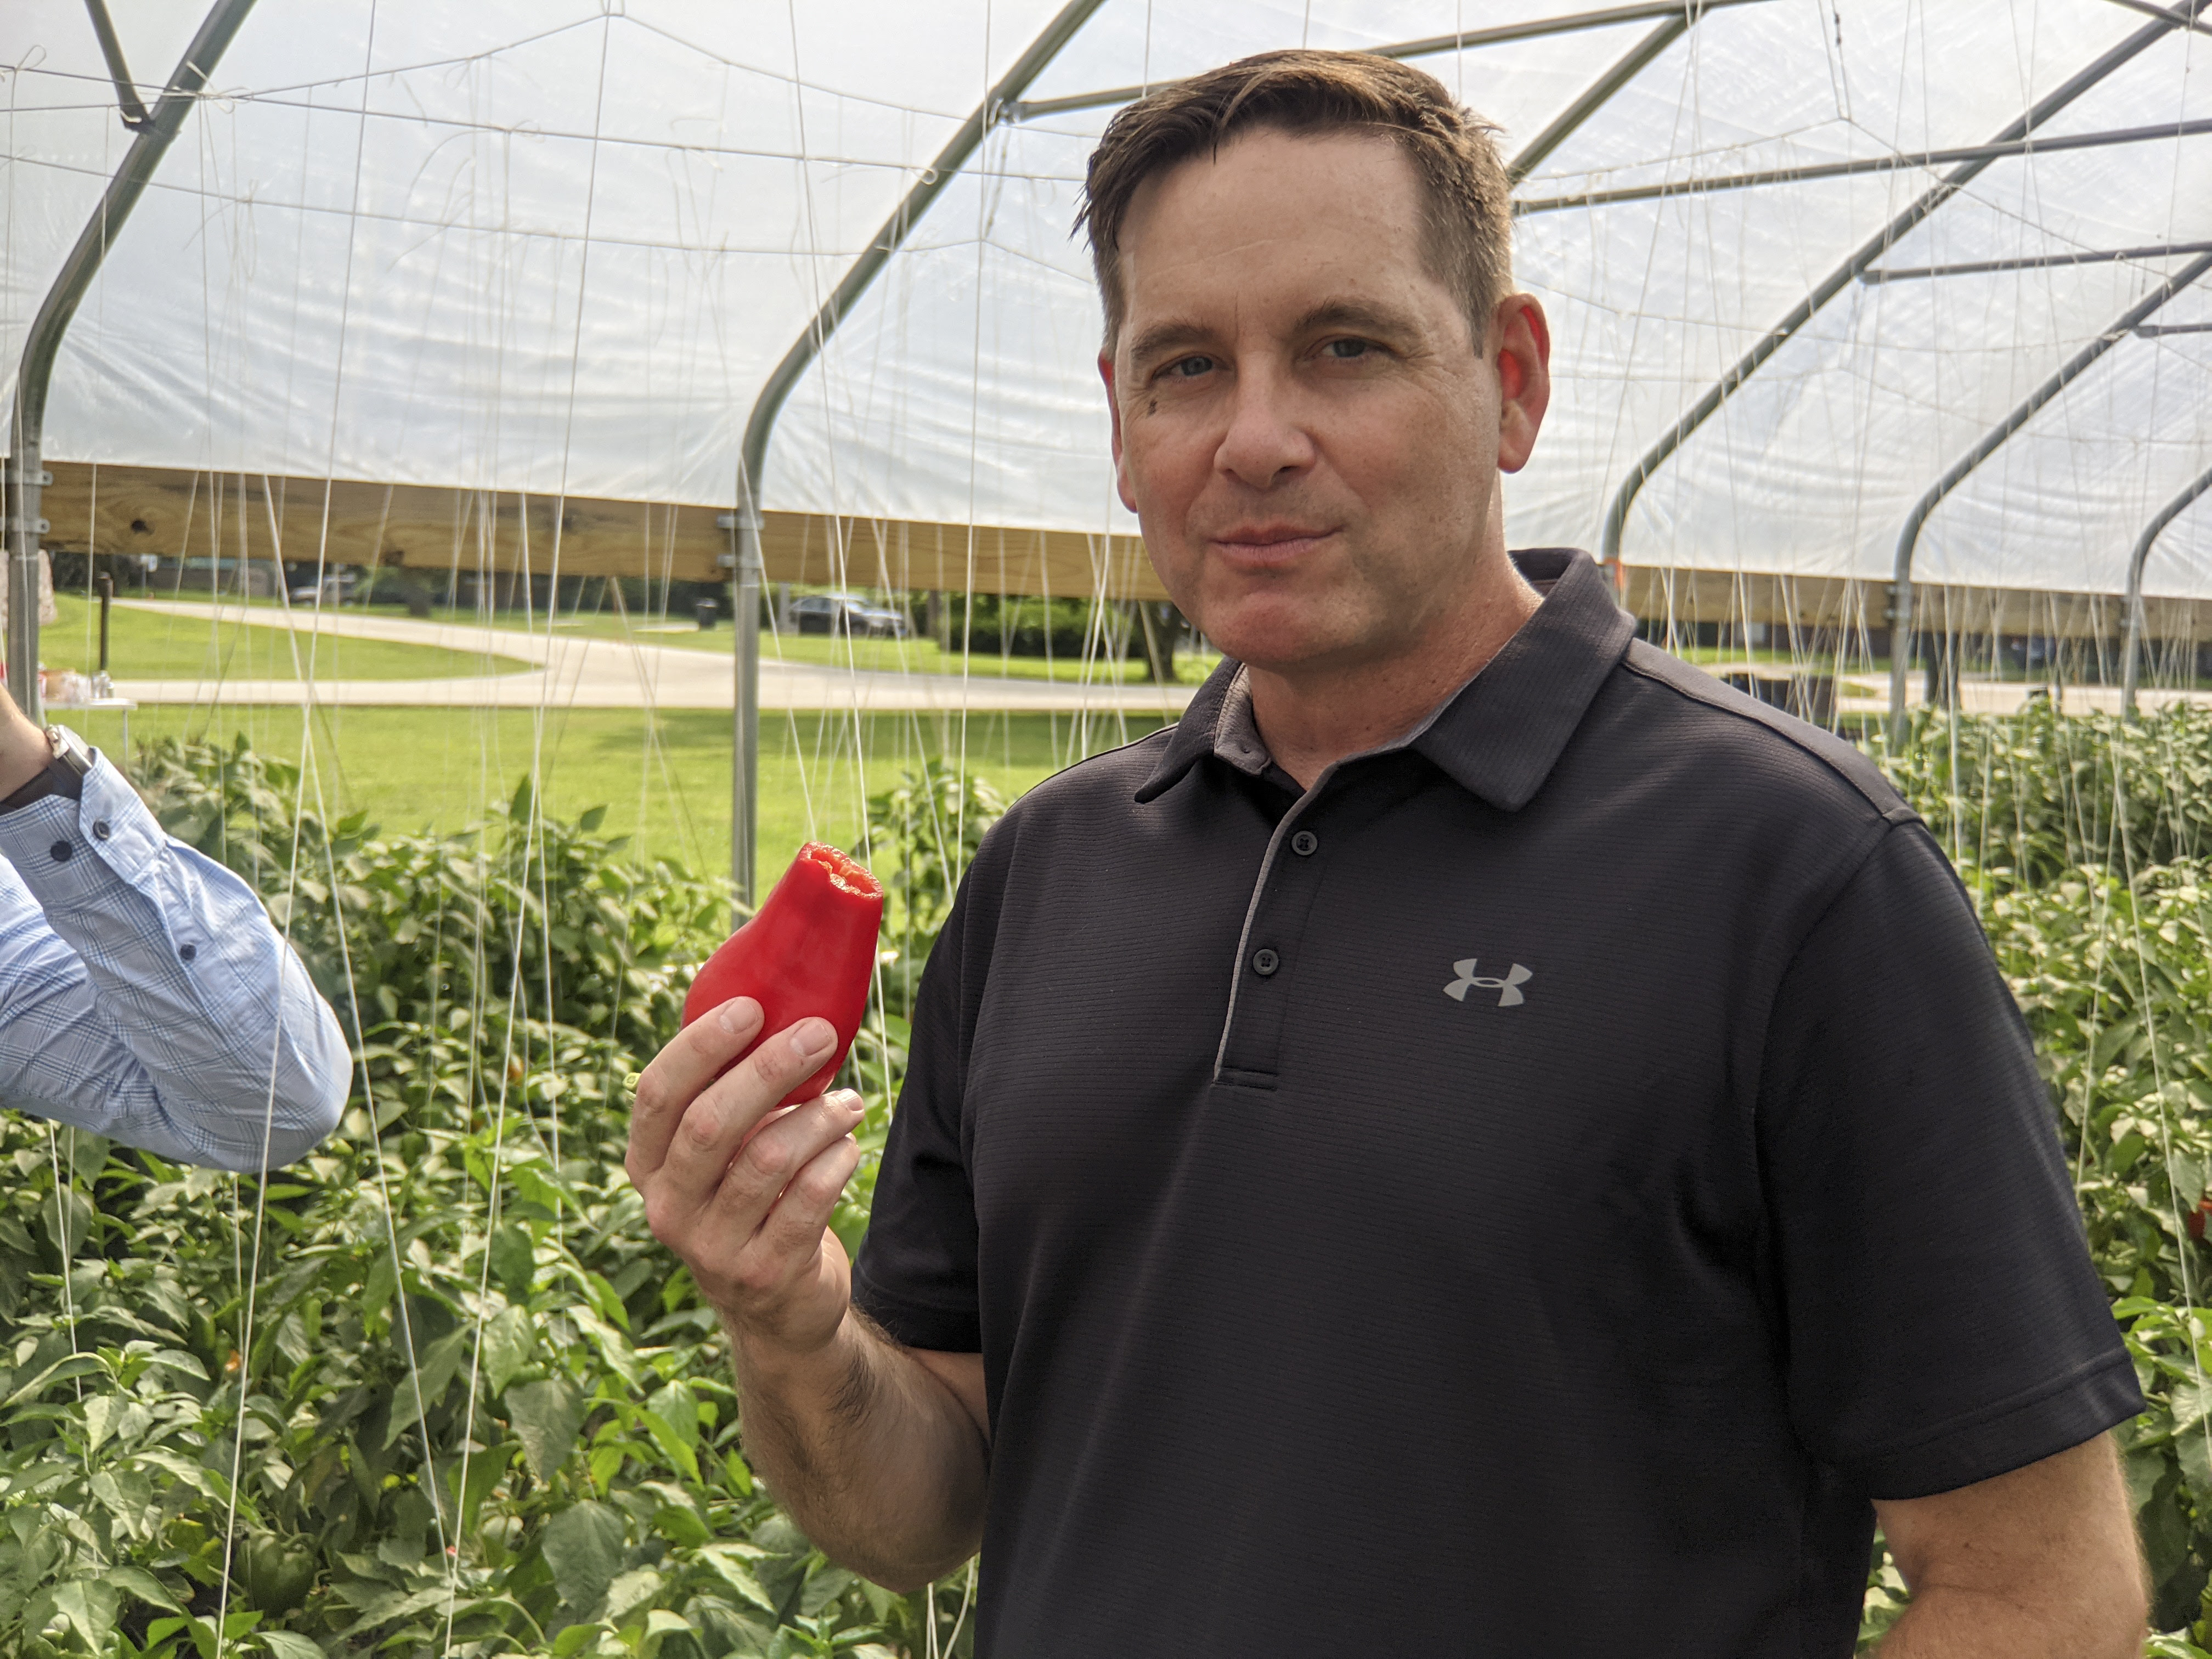 State Rep Tim Butler smiles at the camera after a tasty bite of sweet red pepper grown in the hoop house he's photographed in.